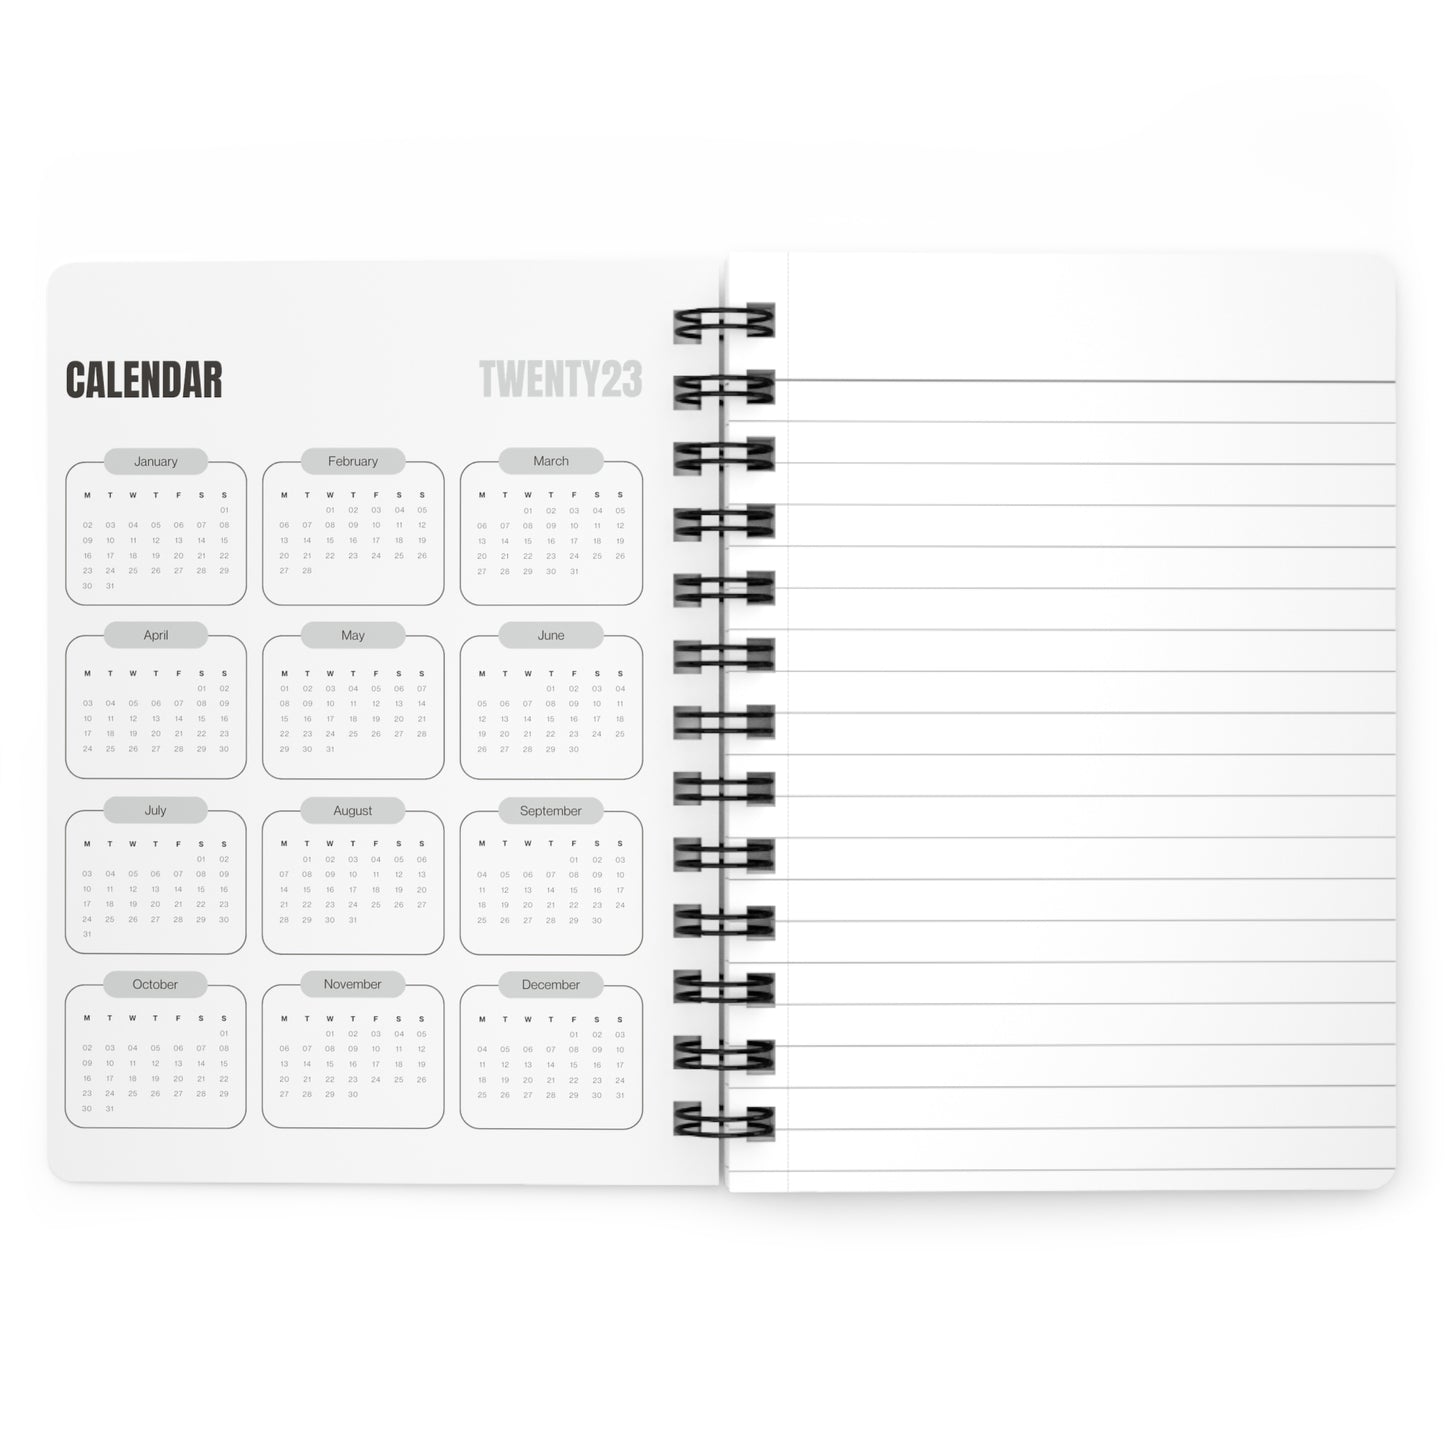 Someday They Will Return Spiral Bound Notebooks and Journals with 2023-2024 Year-at-a-Glance Calendar